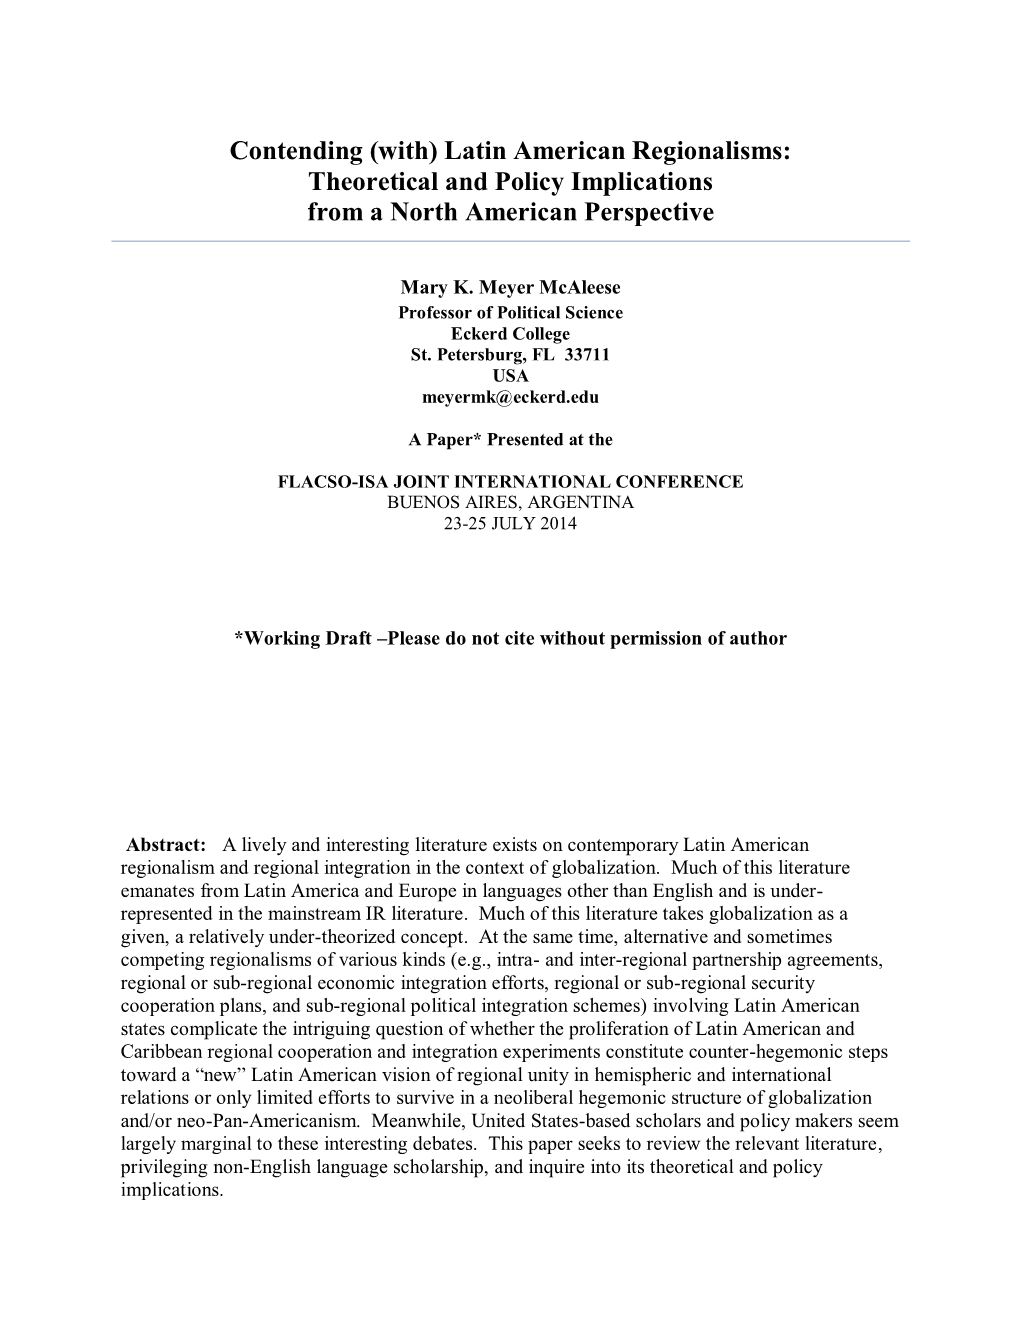 (With) Latin American Regionalisms: Theoretical and Policy Implications from a North American Perspective